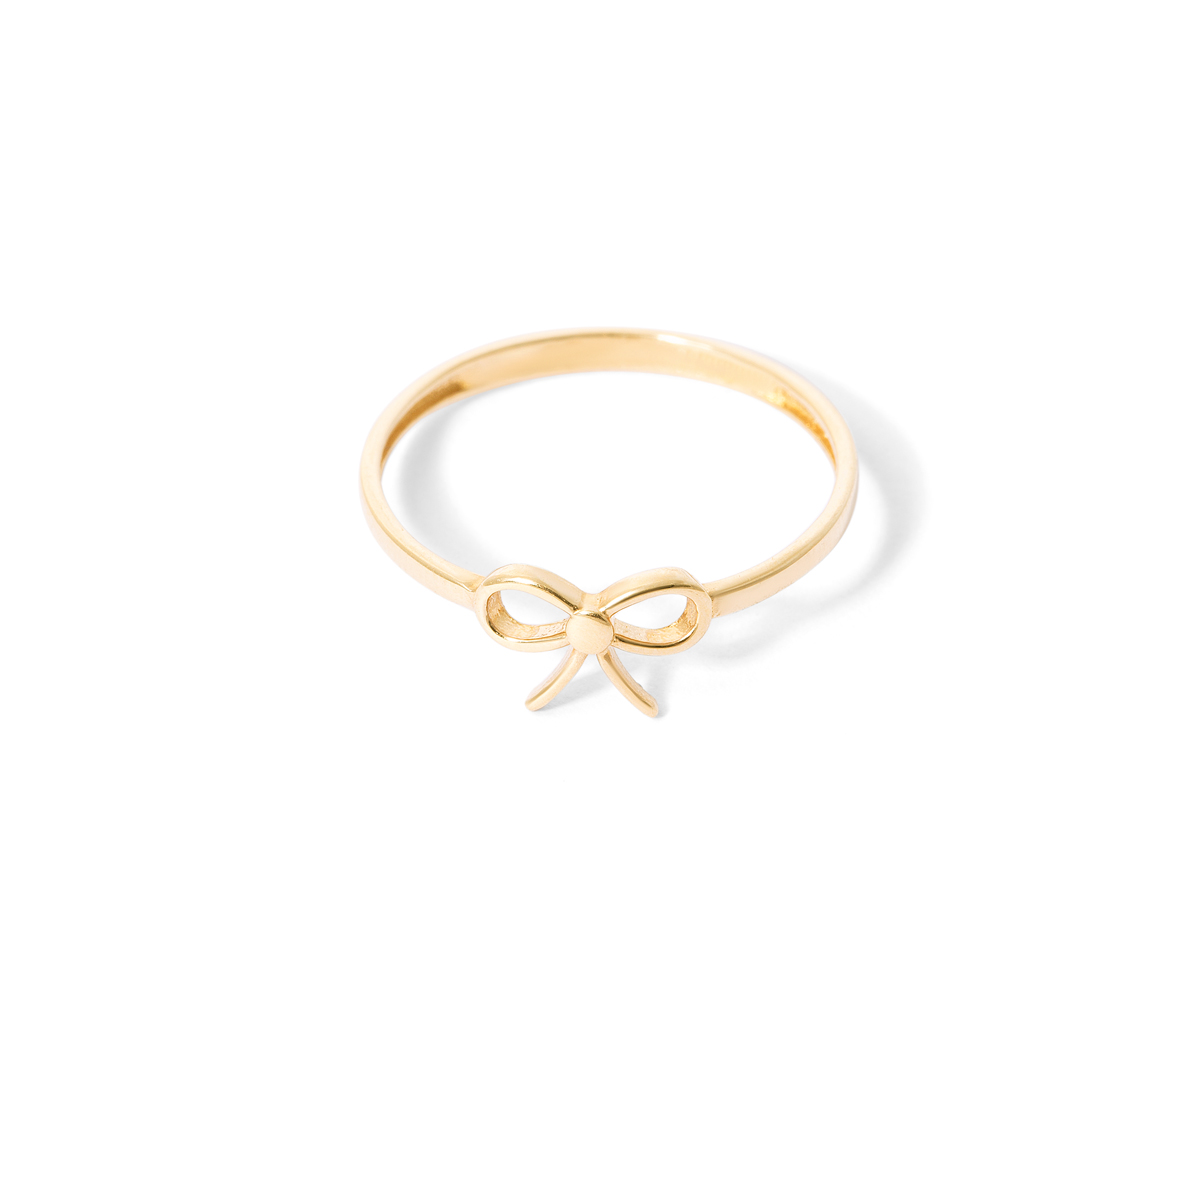 Bow tie gold ring g